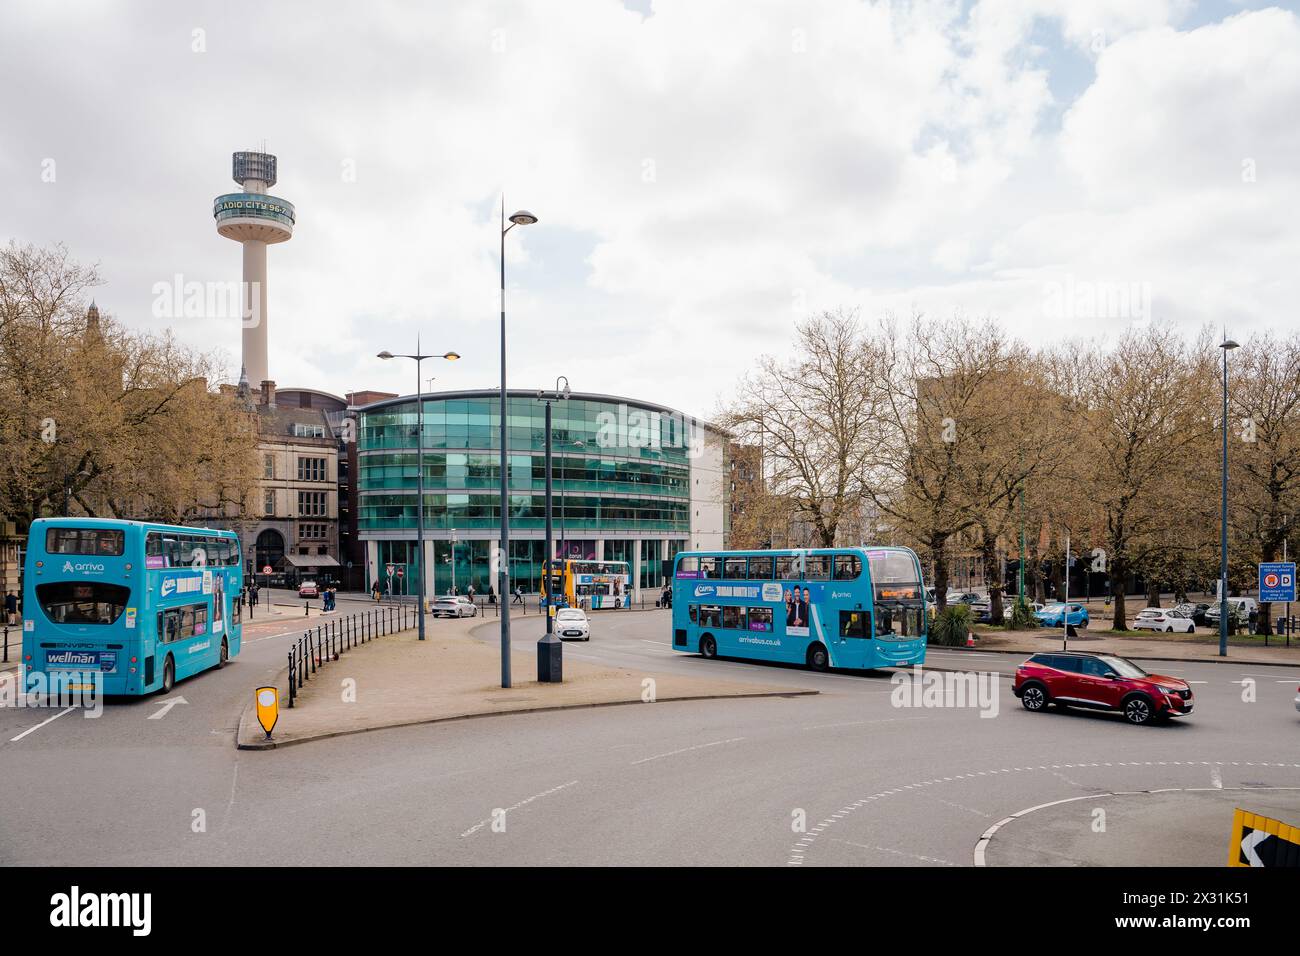 Liverpool, UK, April 11 2024: Radio City tower, seen from the side of the Torus building where the Liverpool City Observatory is also located. Blue bu Stock Photo